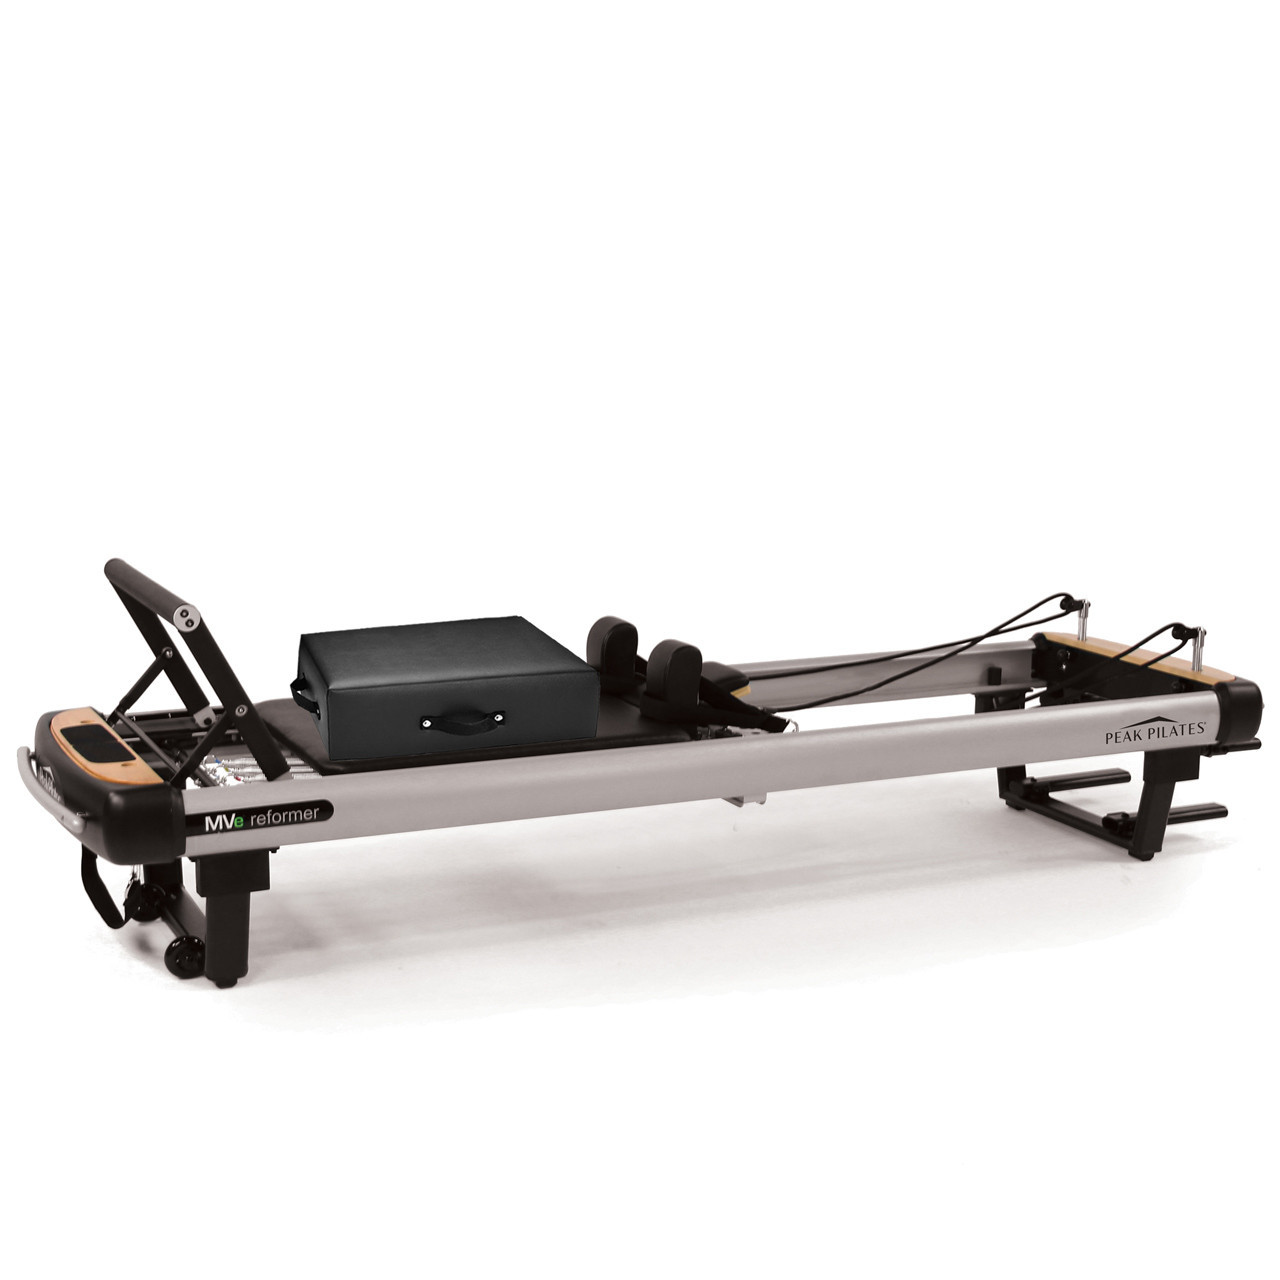 Shop the Peak Pilates MVe® Reformer and Long/Short Box - Treadmill Outlet